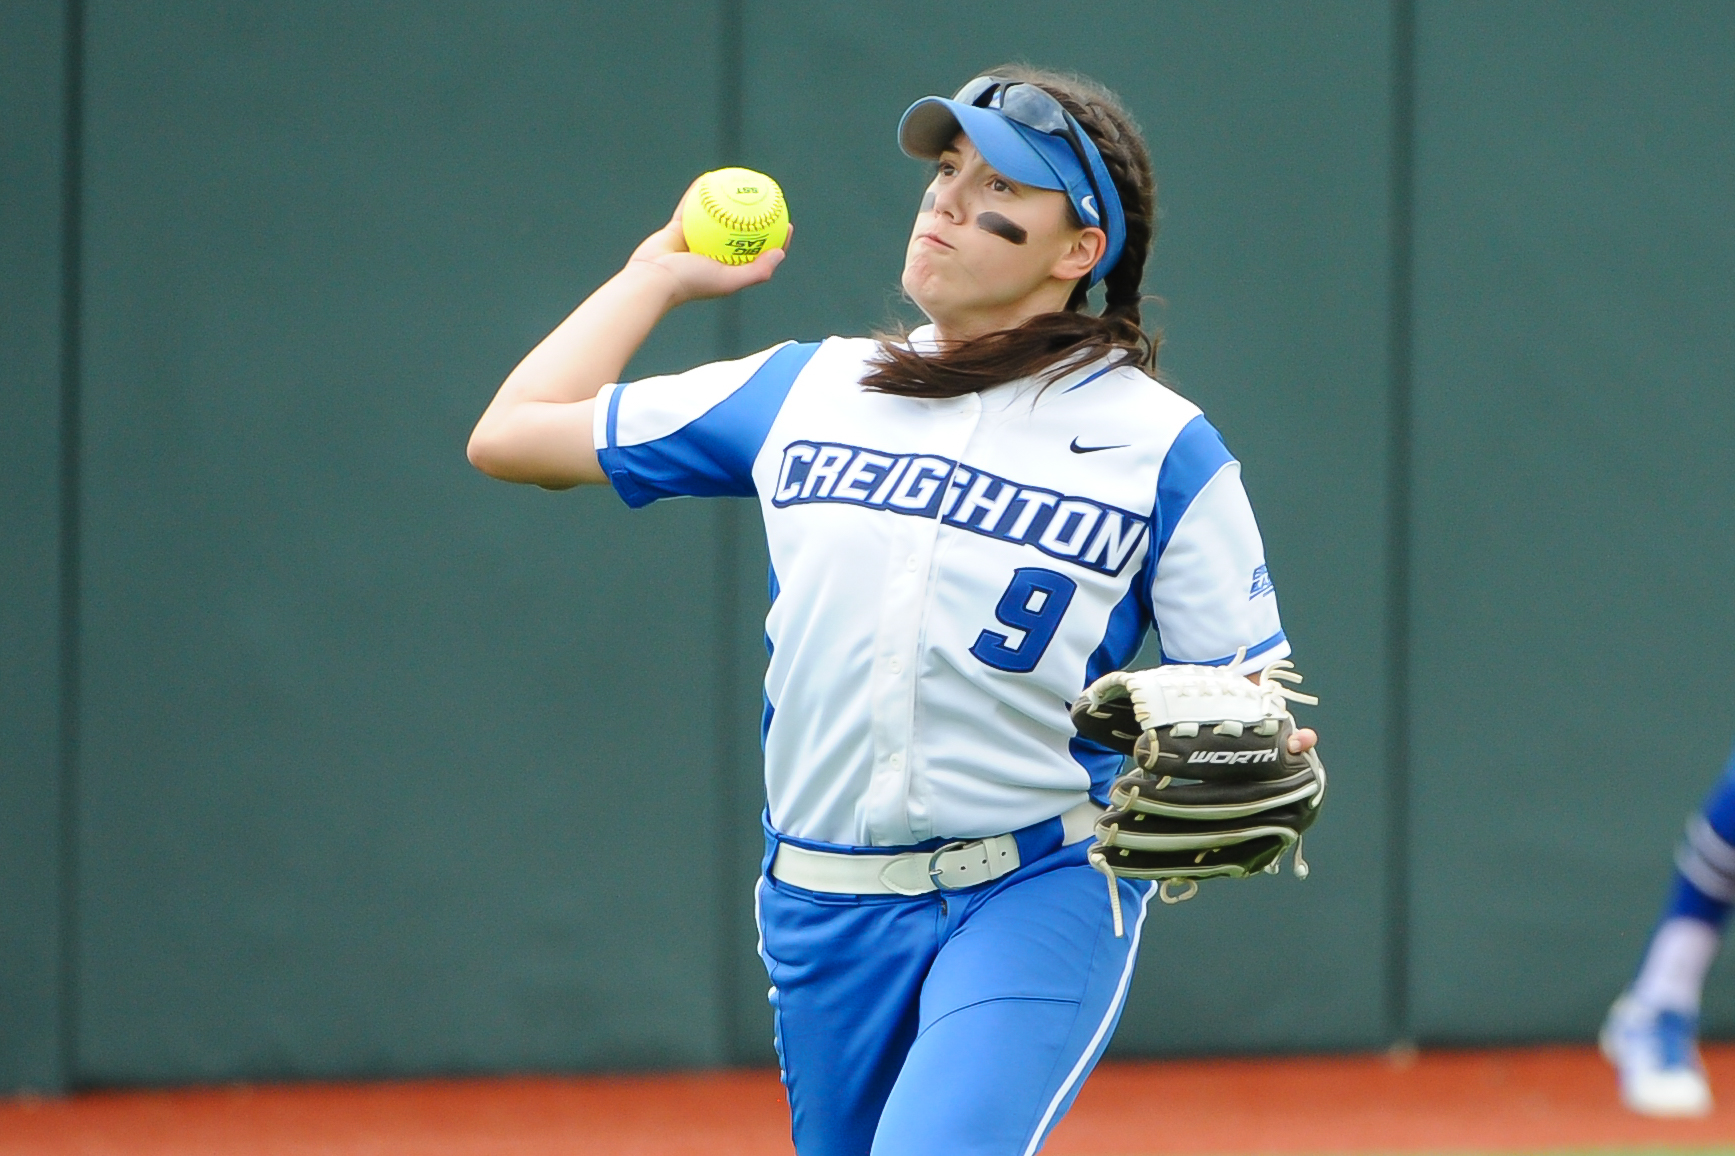 Former Jaguars softball standout Sam Crowley leading the way at Creighton